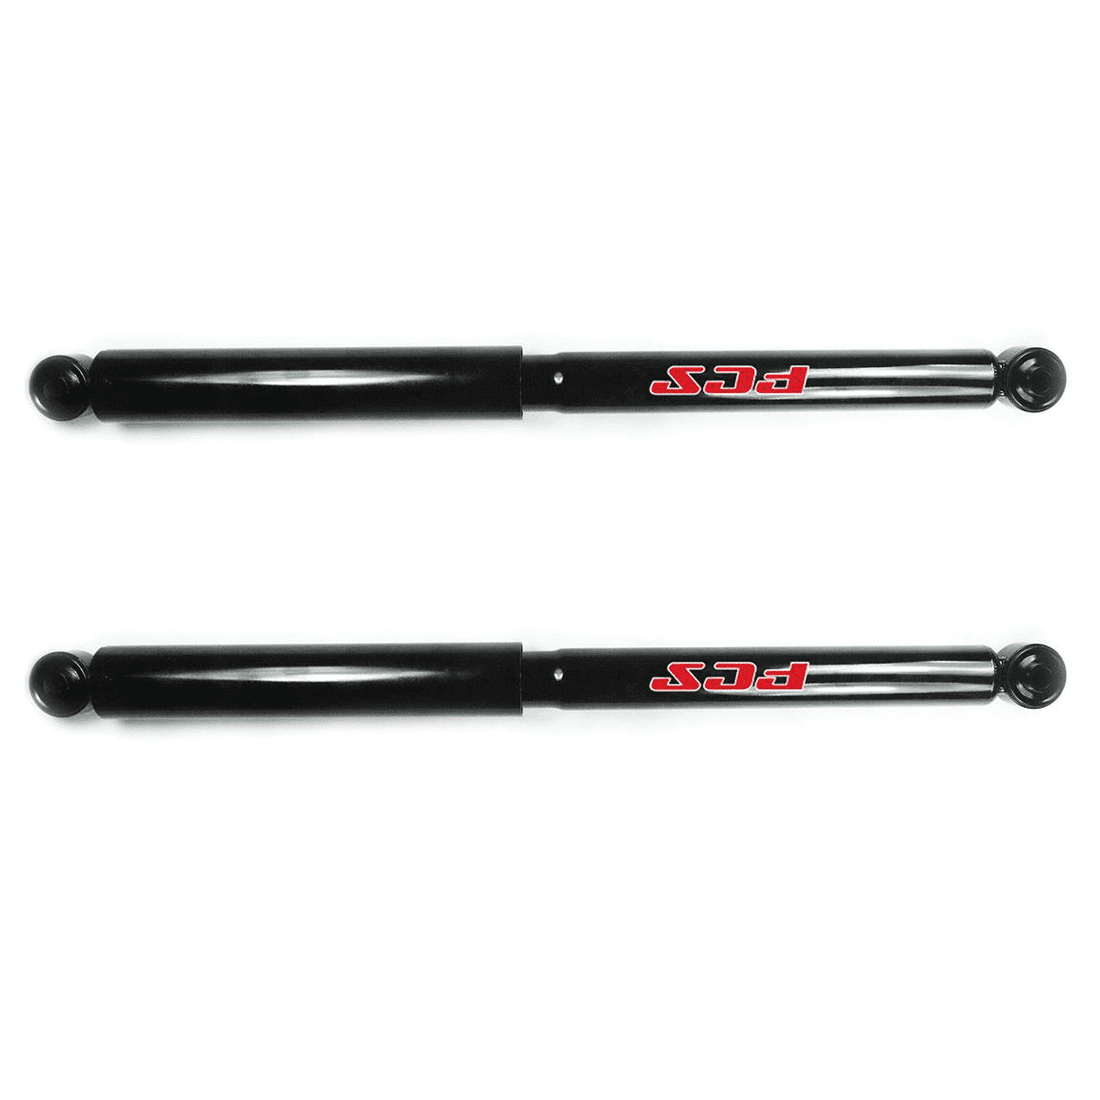 Monroe Gas Magnum Replacement Rear Shocks Pair For Dodge Ram 1500 2009-18 4WD